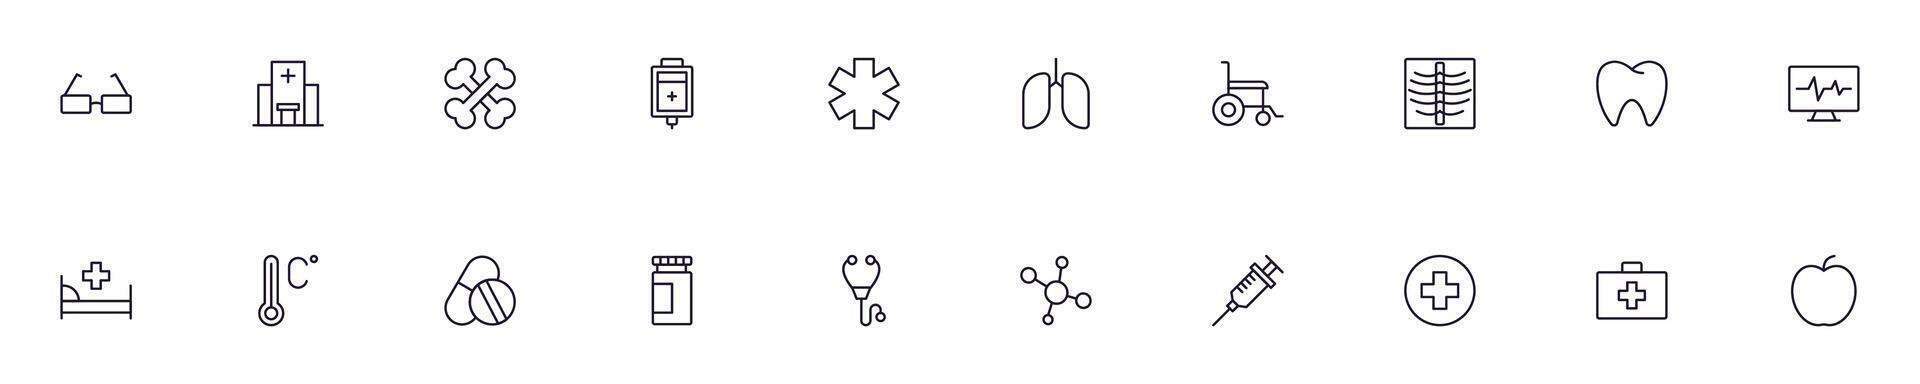 Healthcare linear symbols bundle. Vector collection for web sites, newspapers, apps, infographics